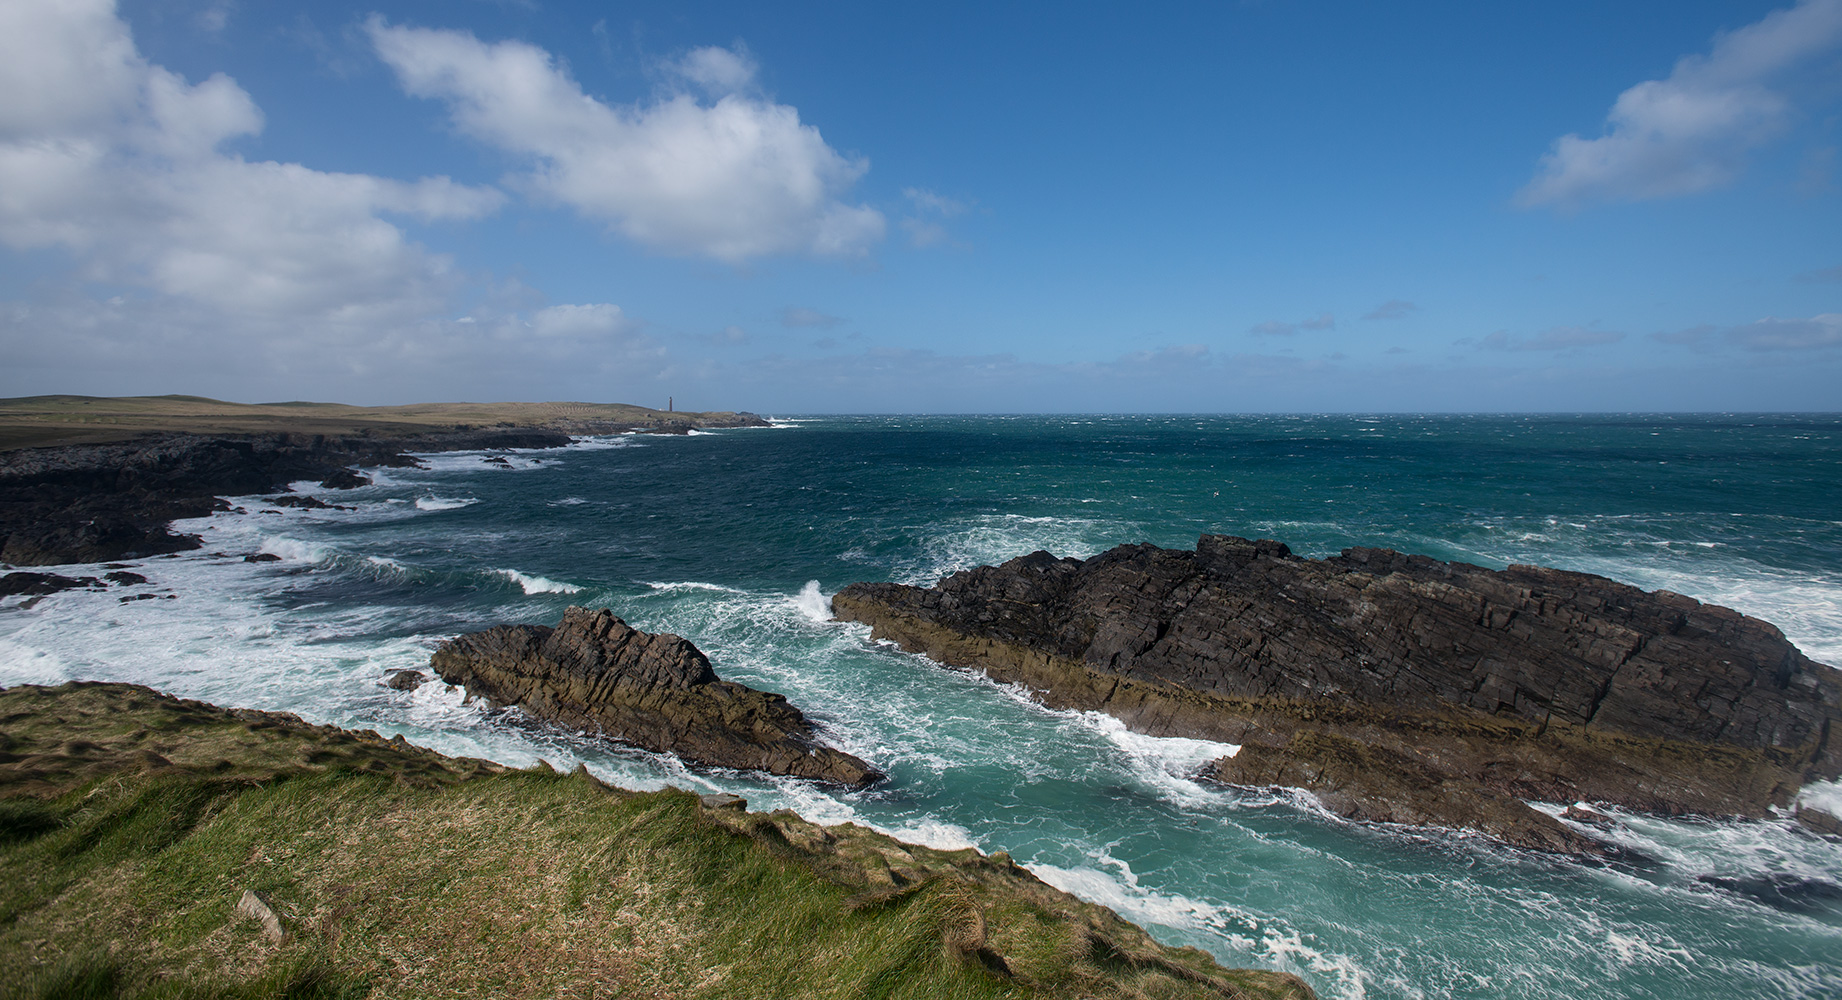 The lighthouse at the northern tip of the Isle of Lewis. Windiest place in the UK!Nikon D610, 17-35mm